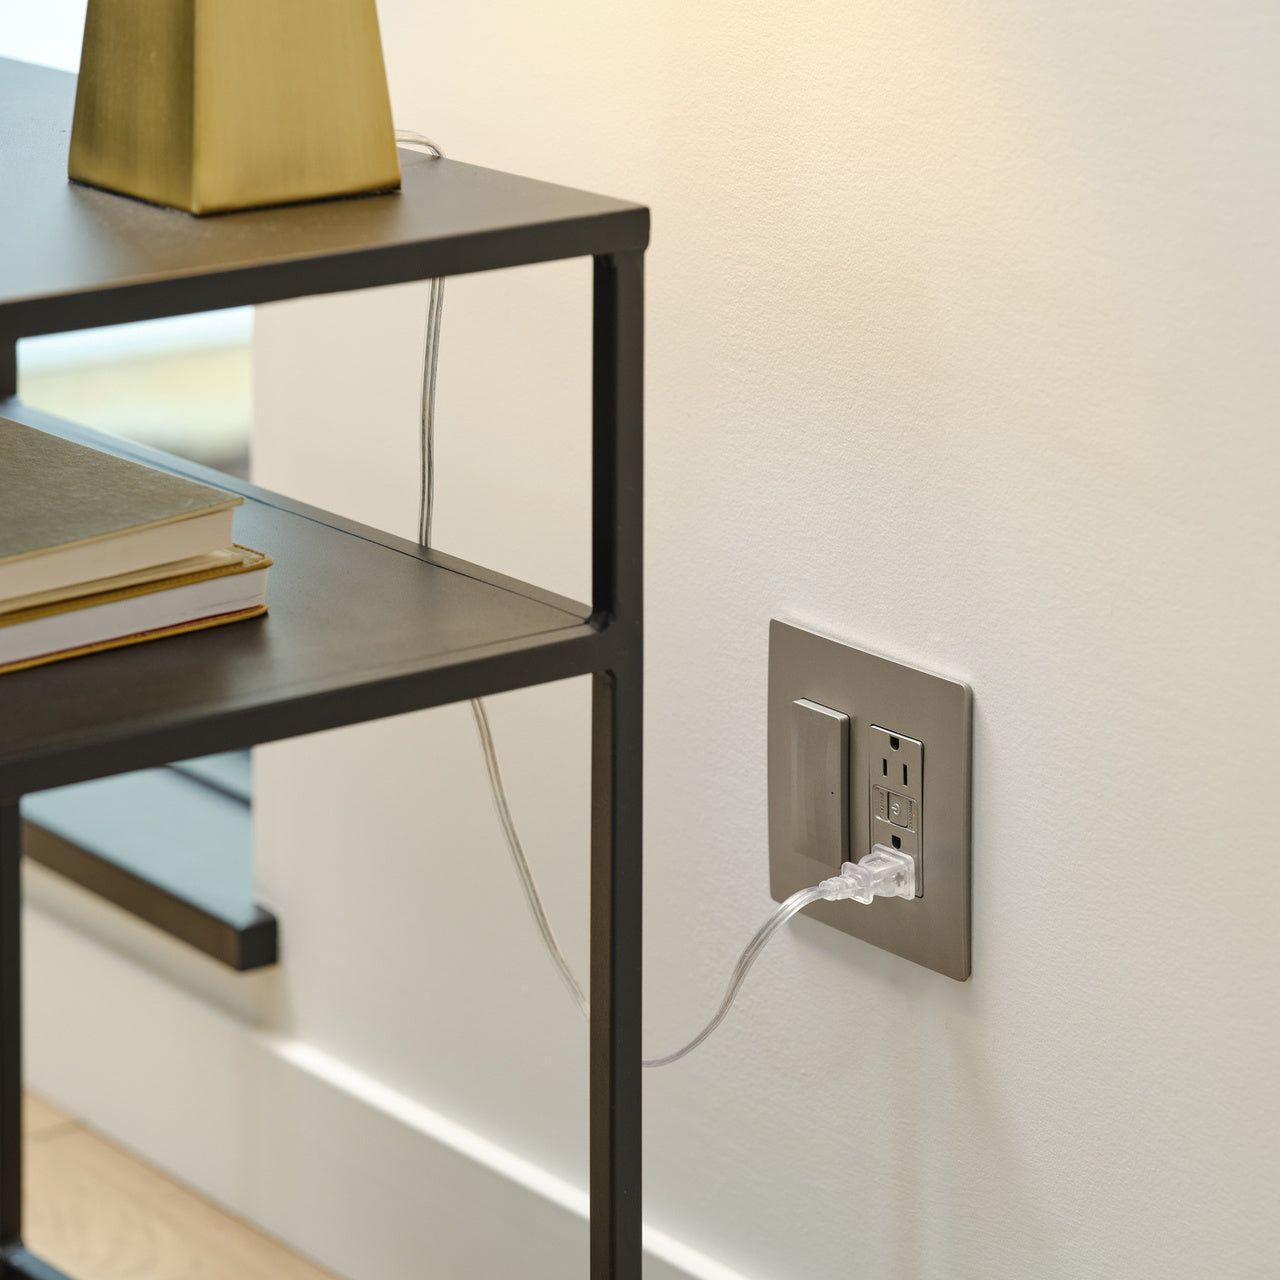 Legrand - Smart 15A Outlet with Netatmo - Lights Canada